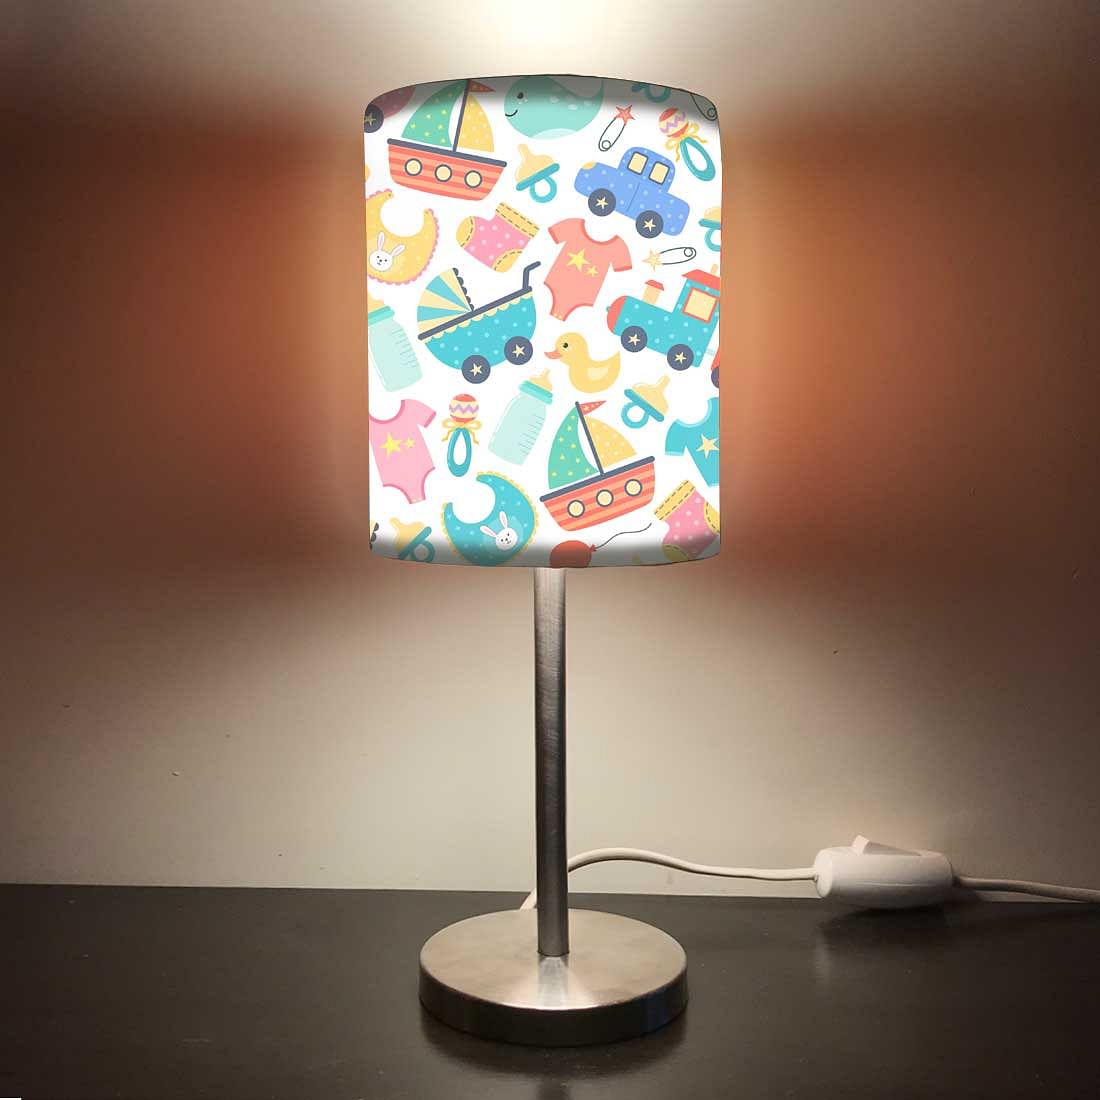 Small Table Childrens Lamp for Bedroom Light - 0011 Nutcase